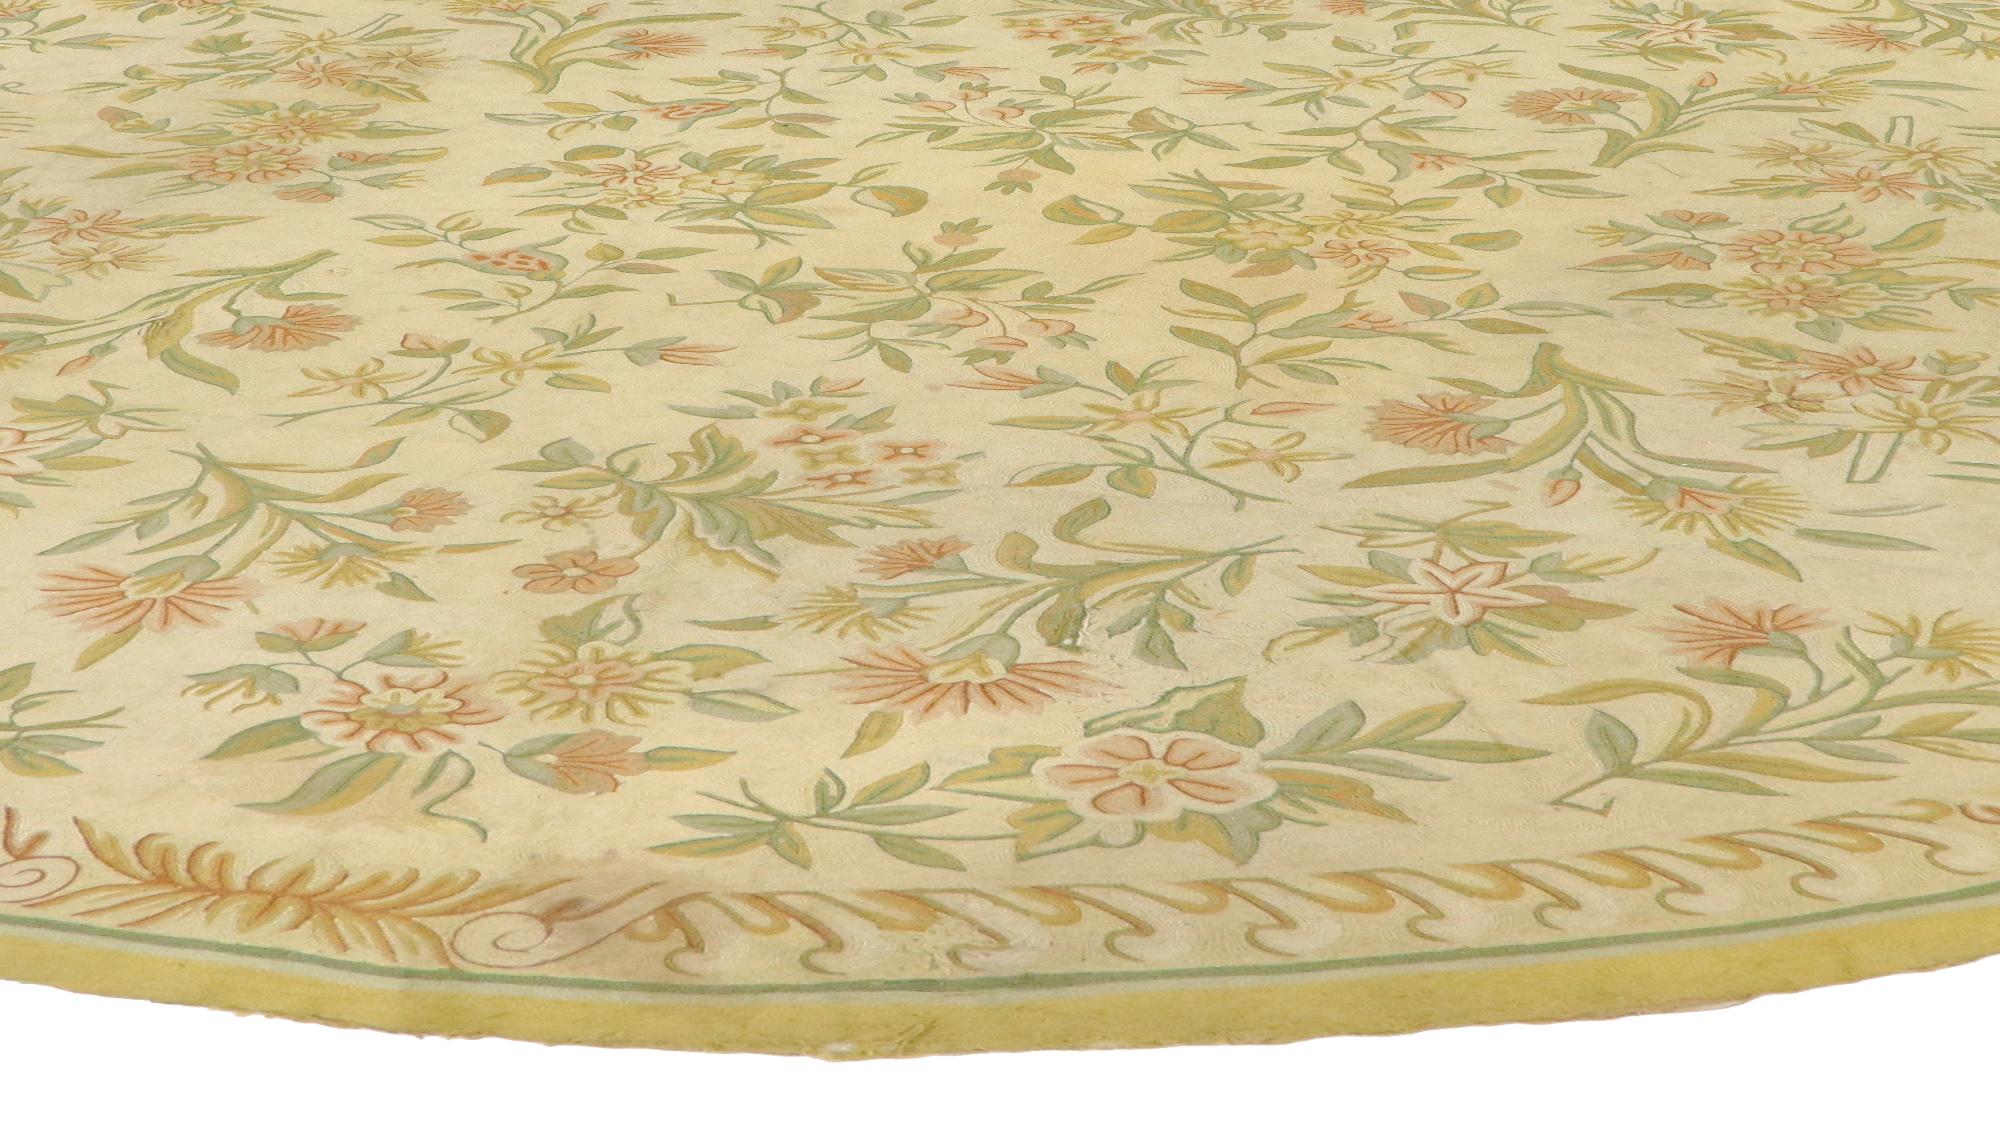 French Provincial Antique Indian Floral Chainstitch Round Area Rug For Sale